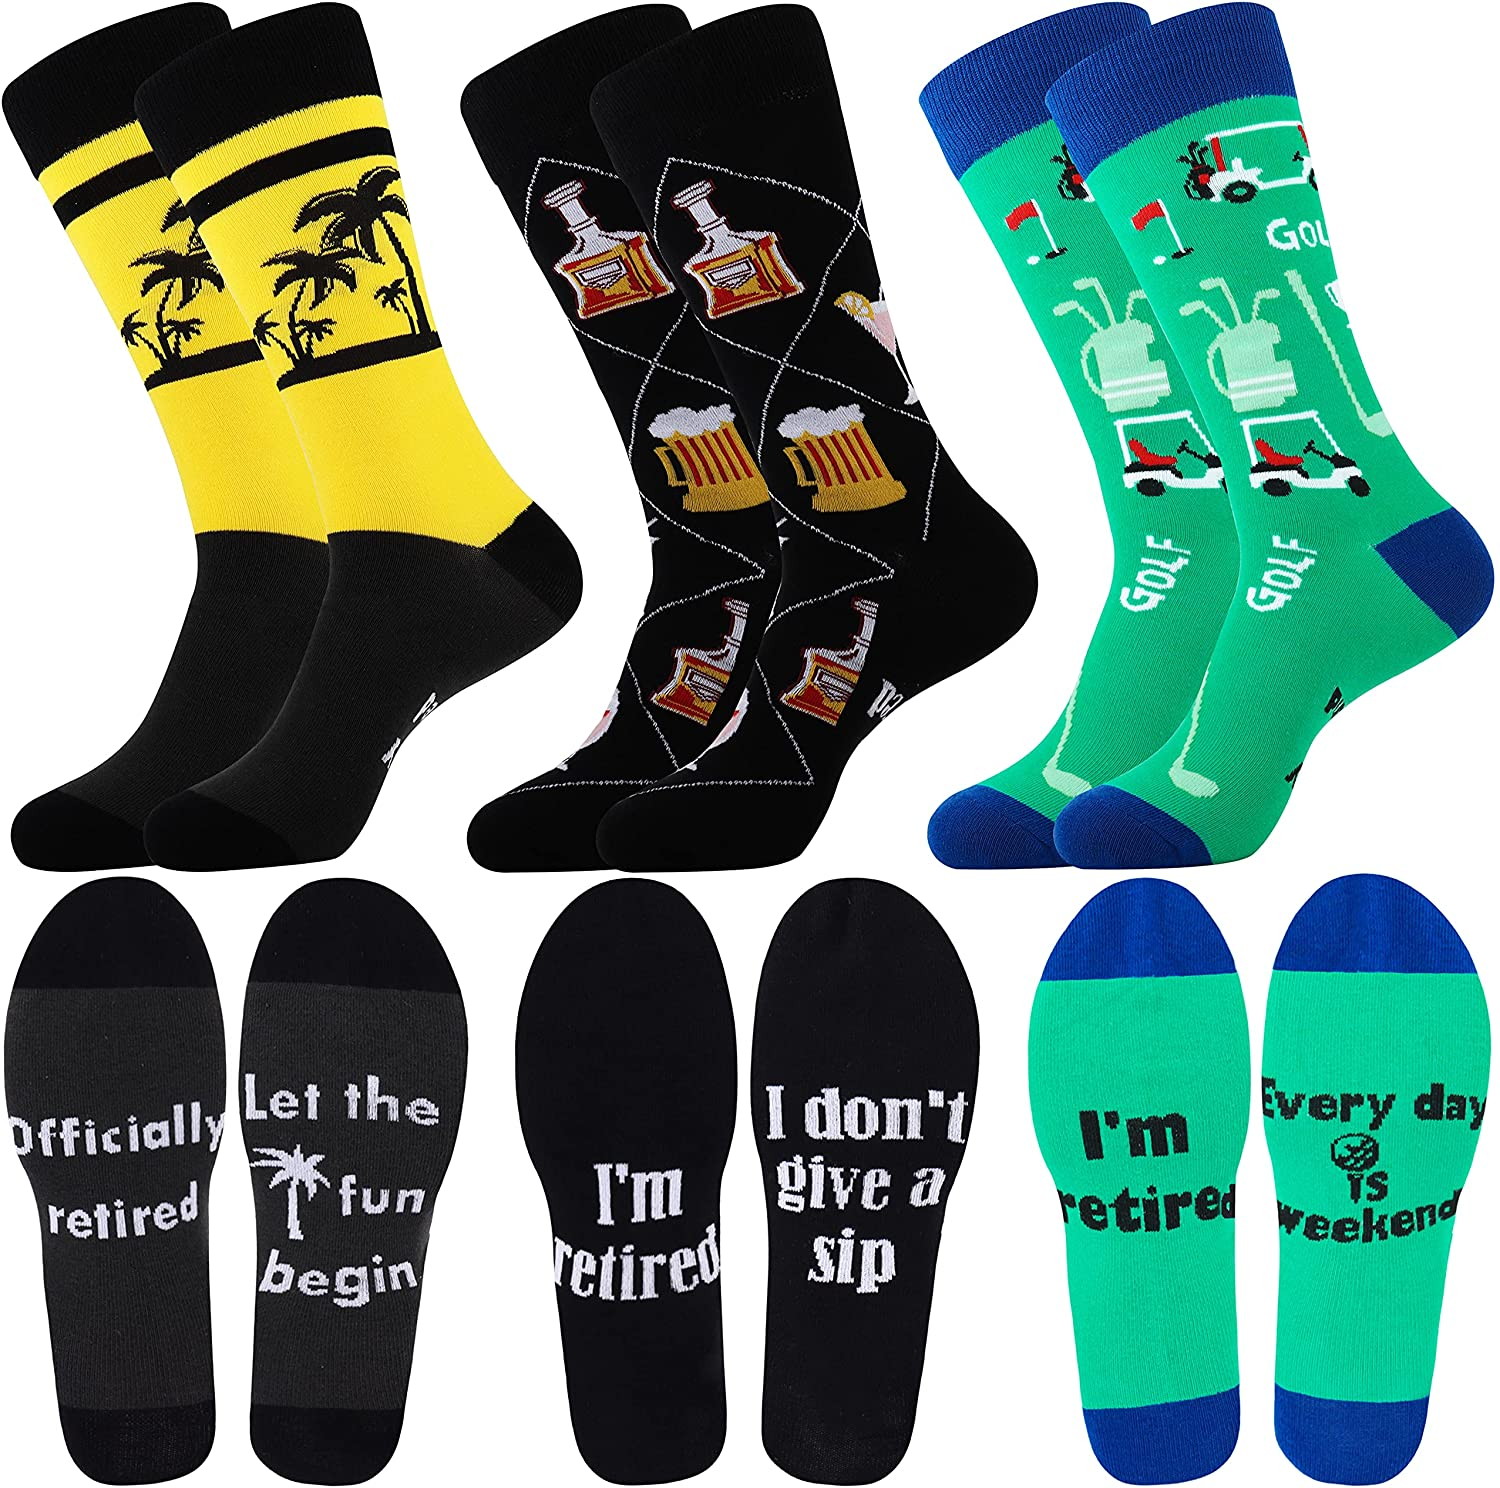 Mens Funny Fun Crazy Dress Crew Socks Pack Funky Novelty Cool Gifts